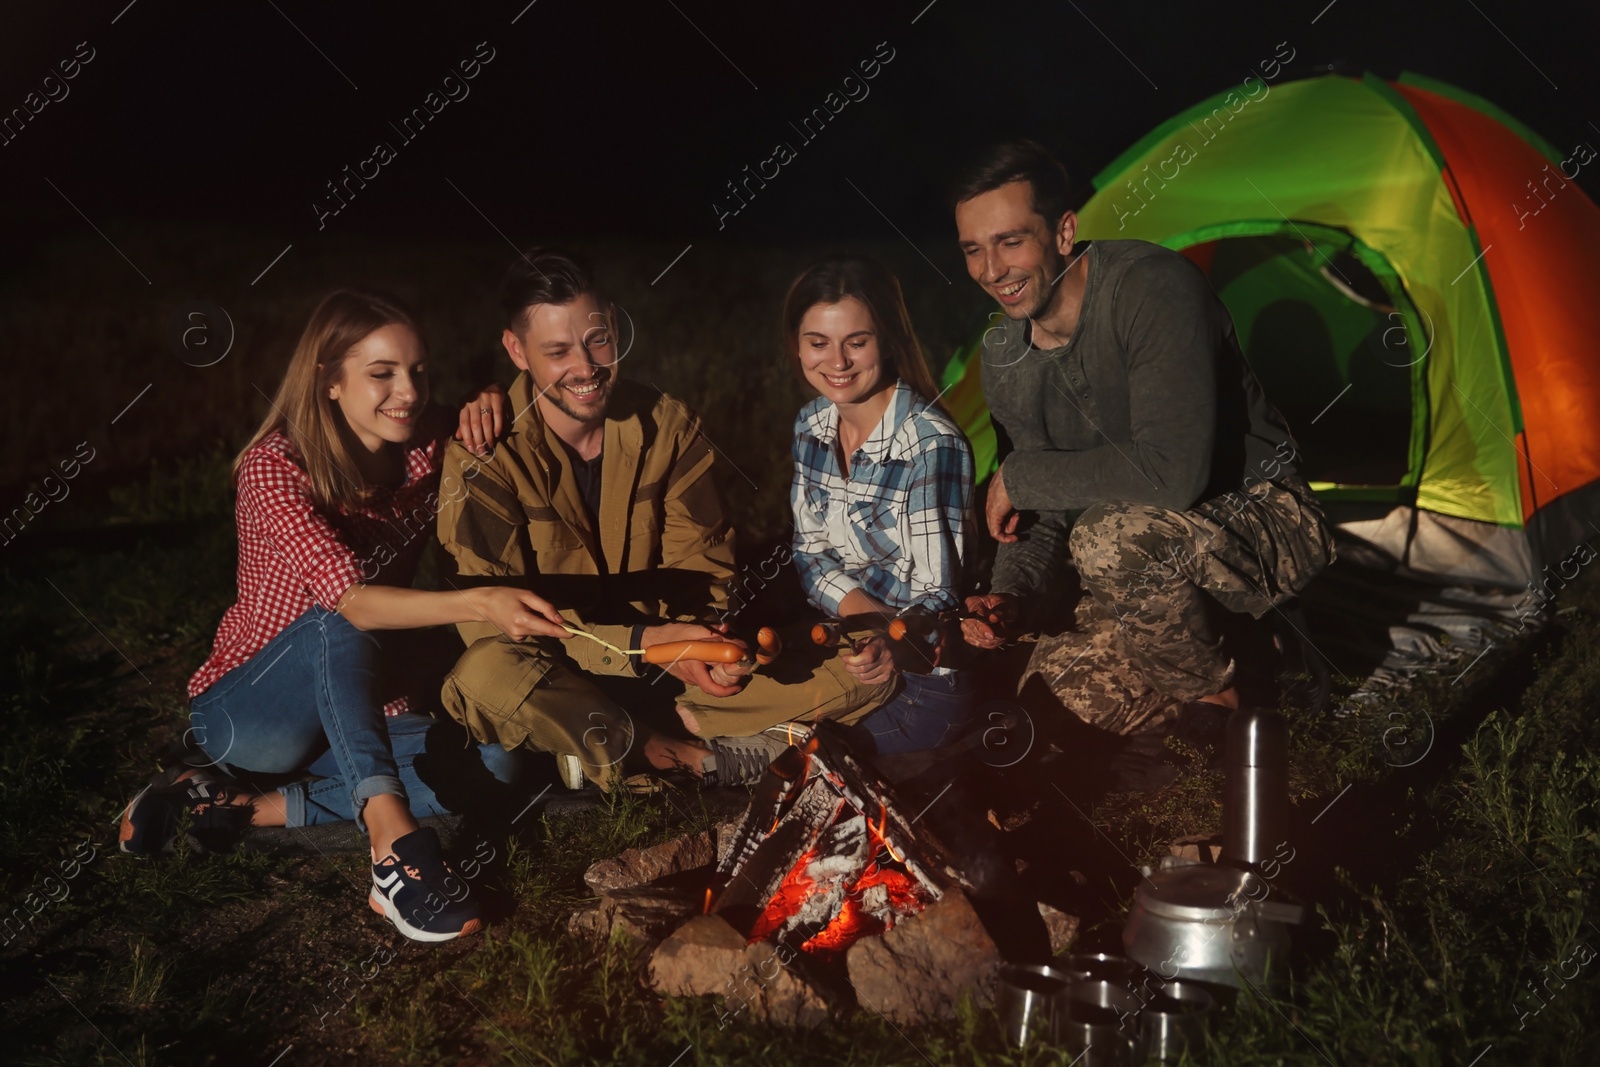 Photo of Friends frying sausages on bonfire at night. Camping season